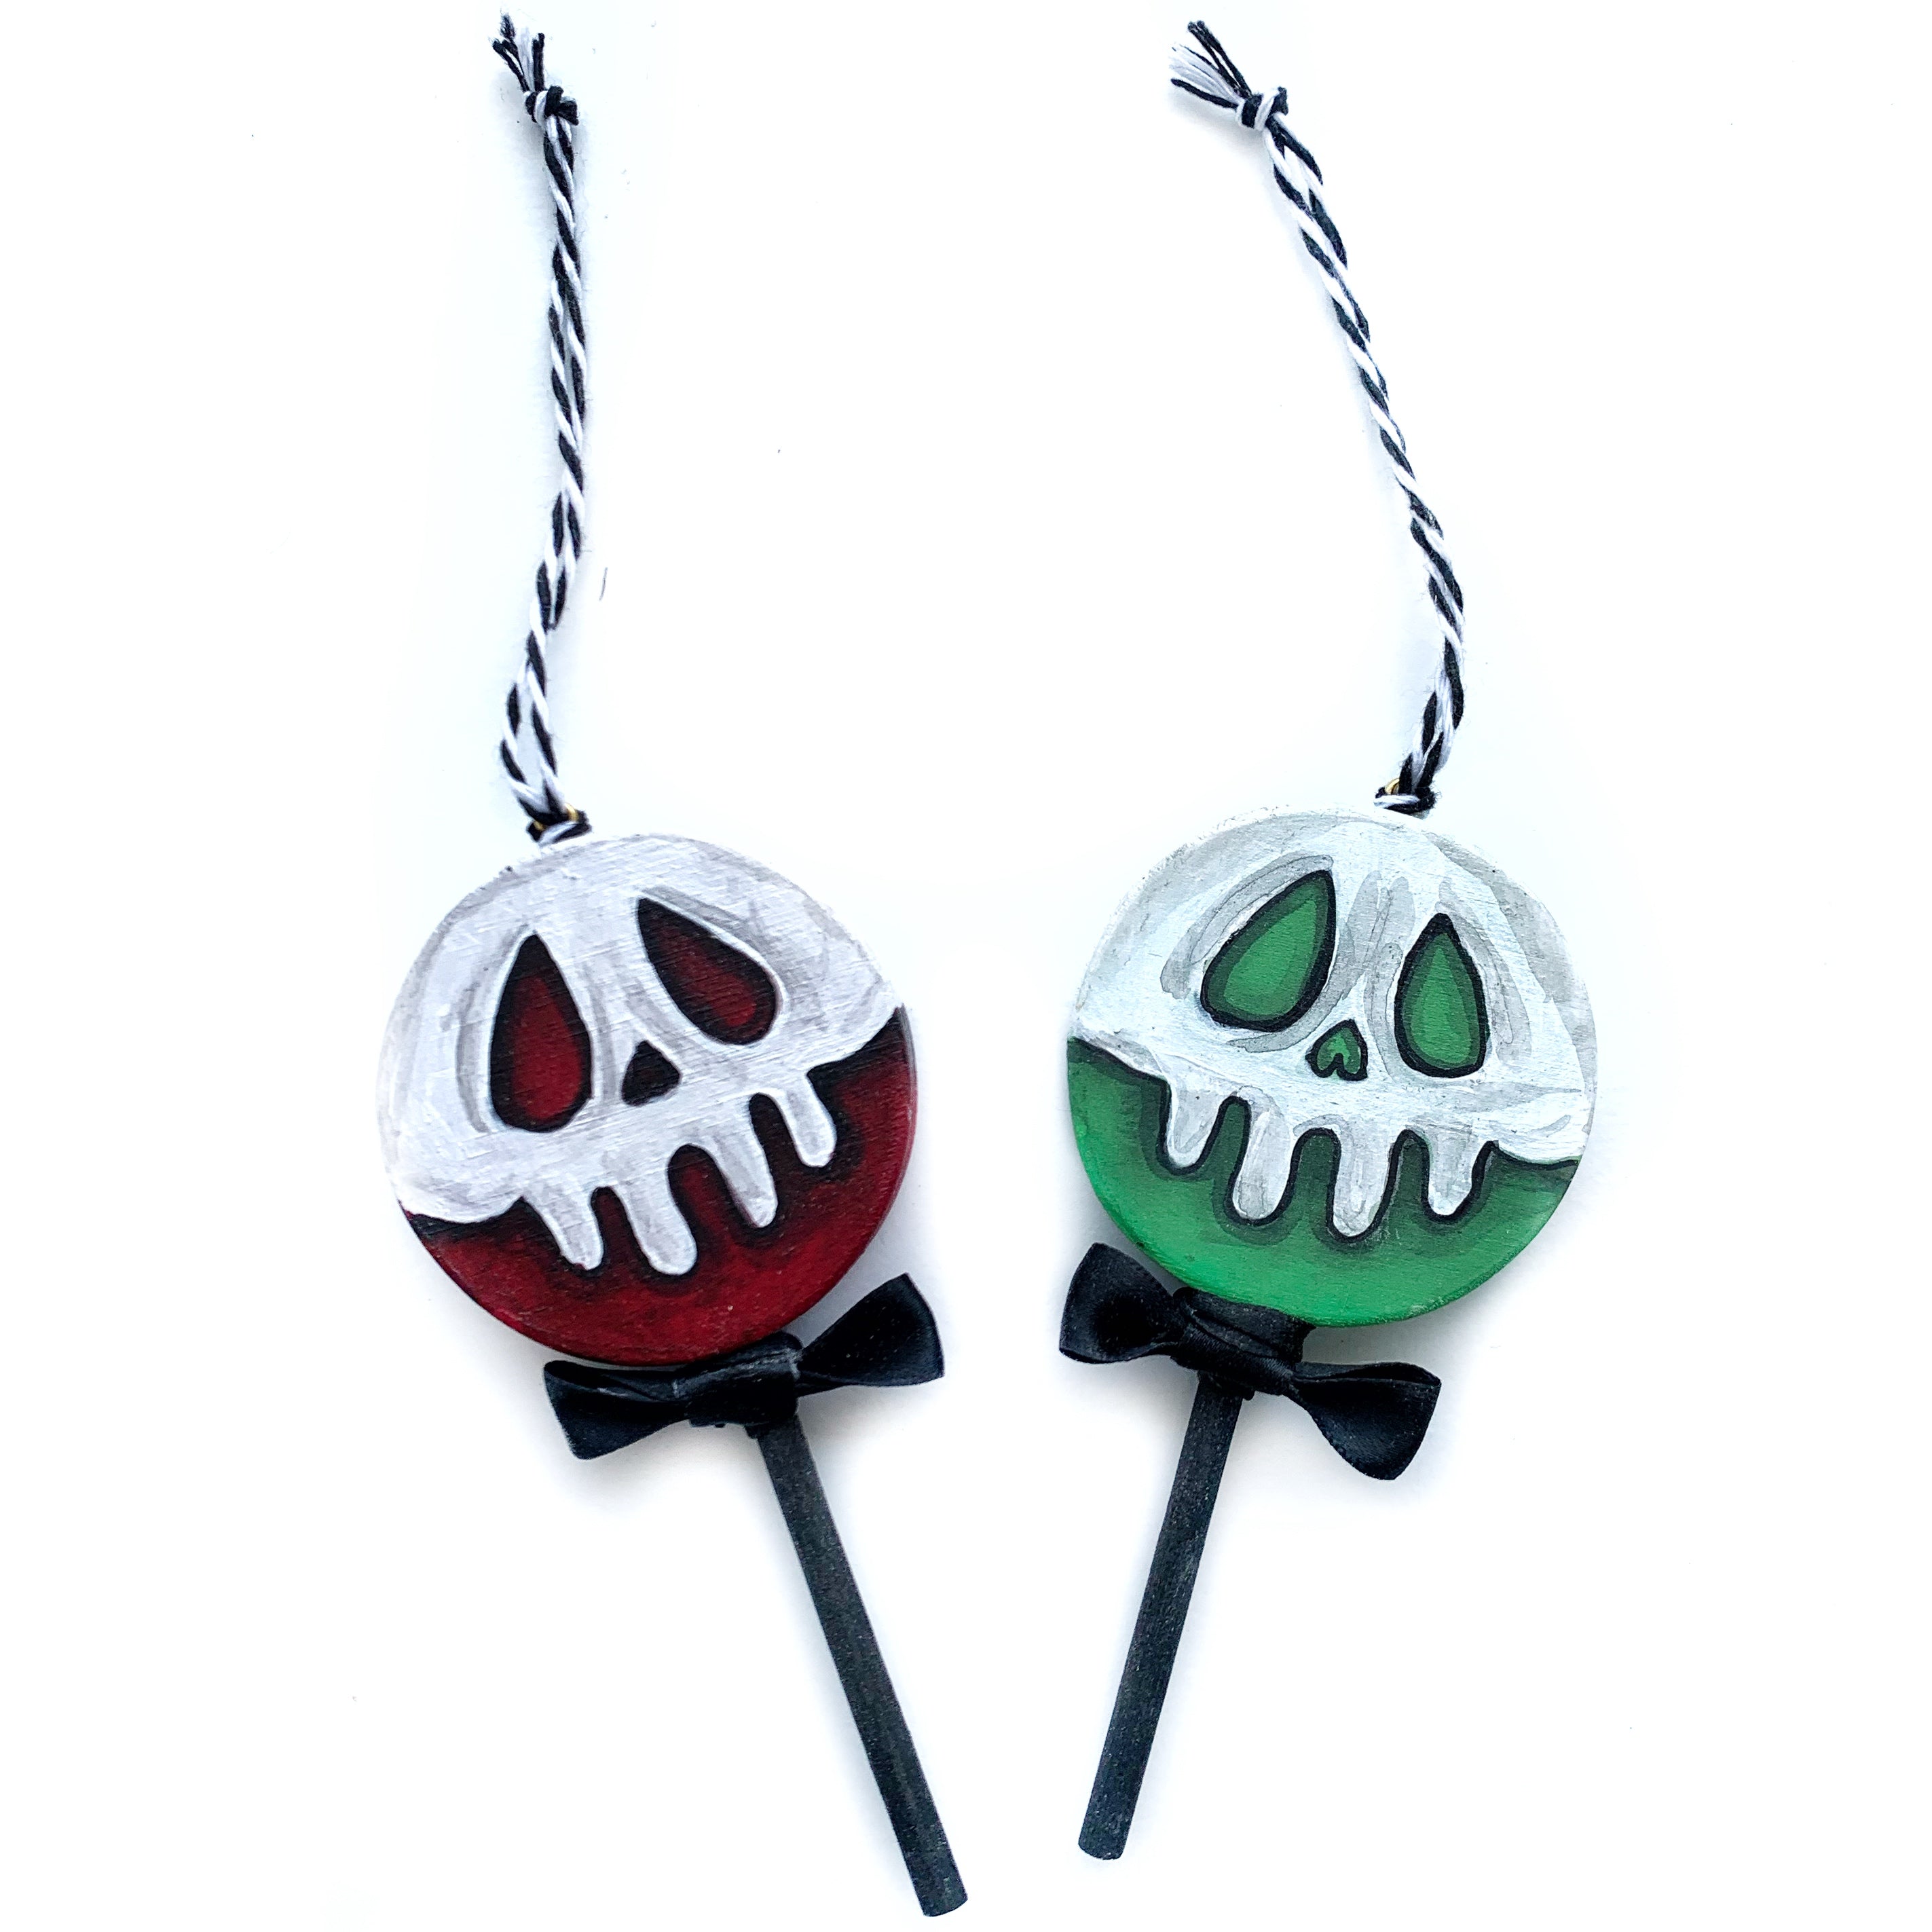 Poison Candy Apple Wooden Ornaments